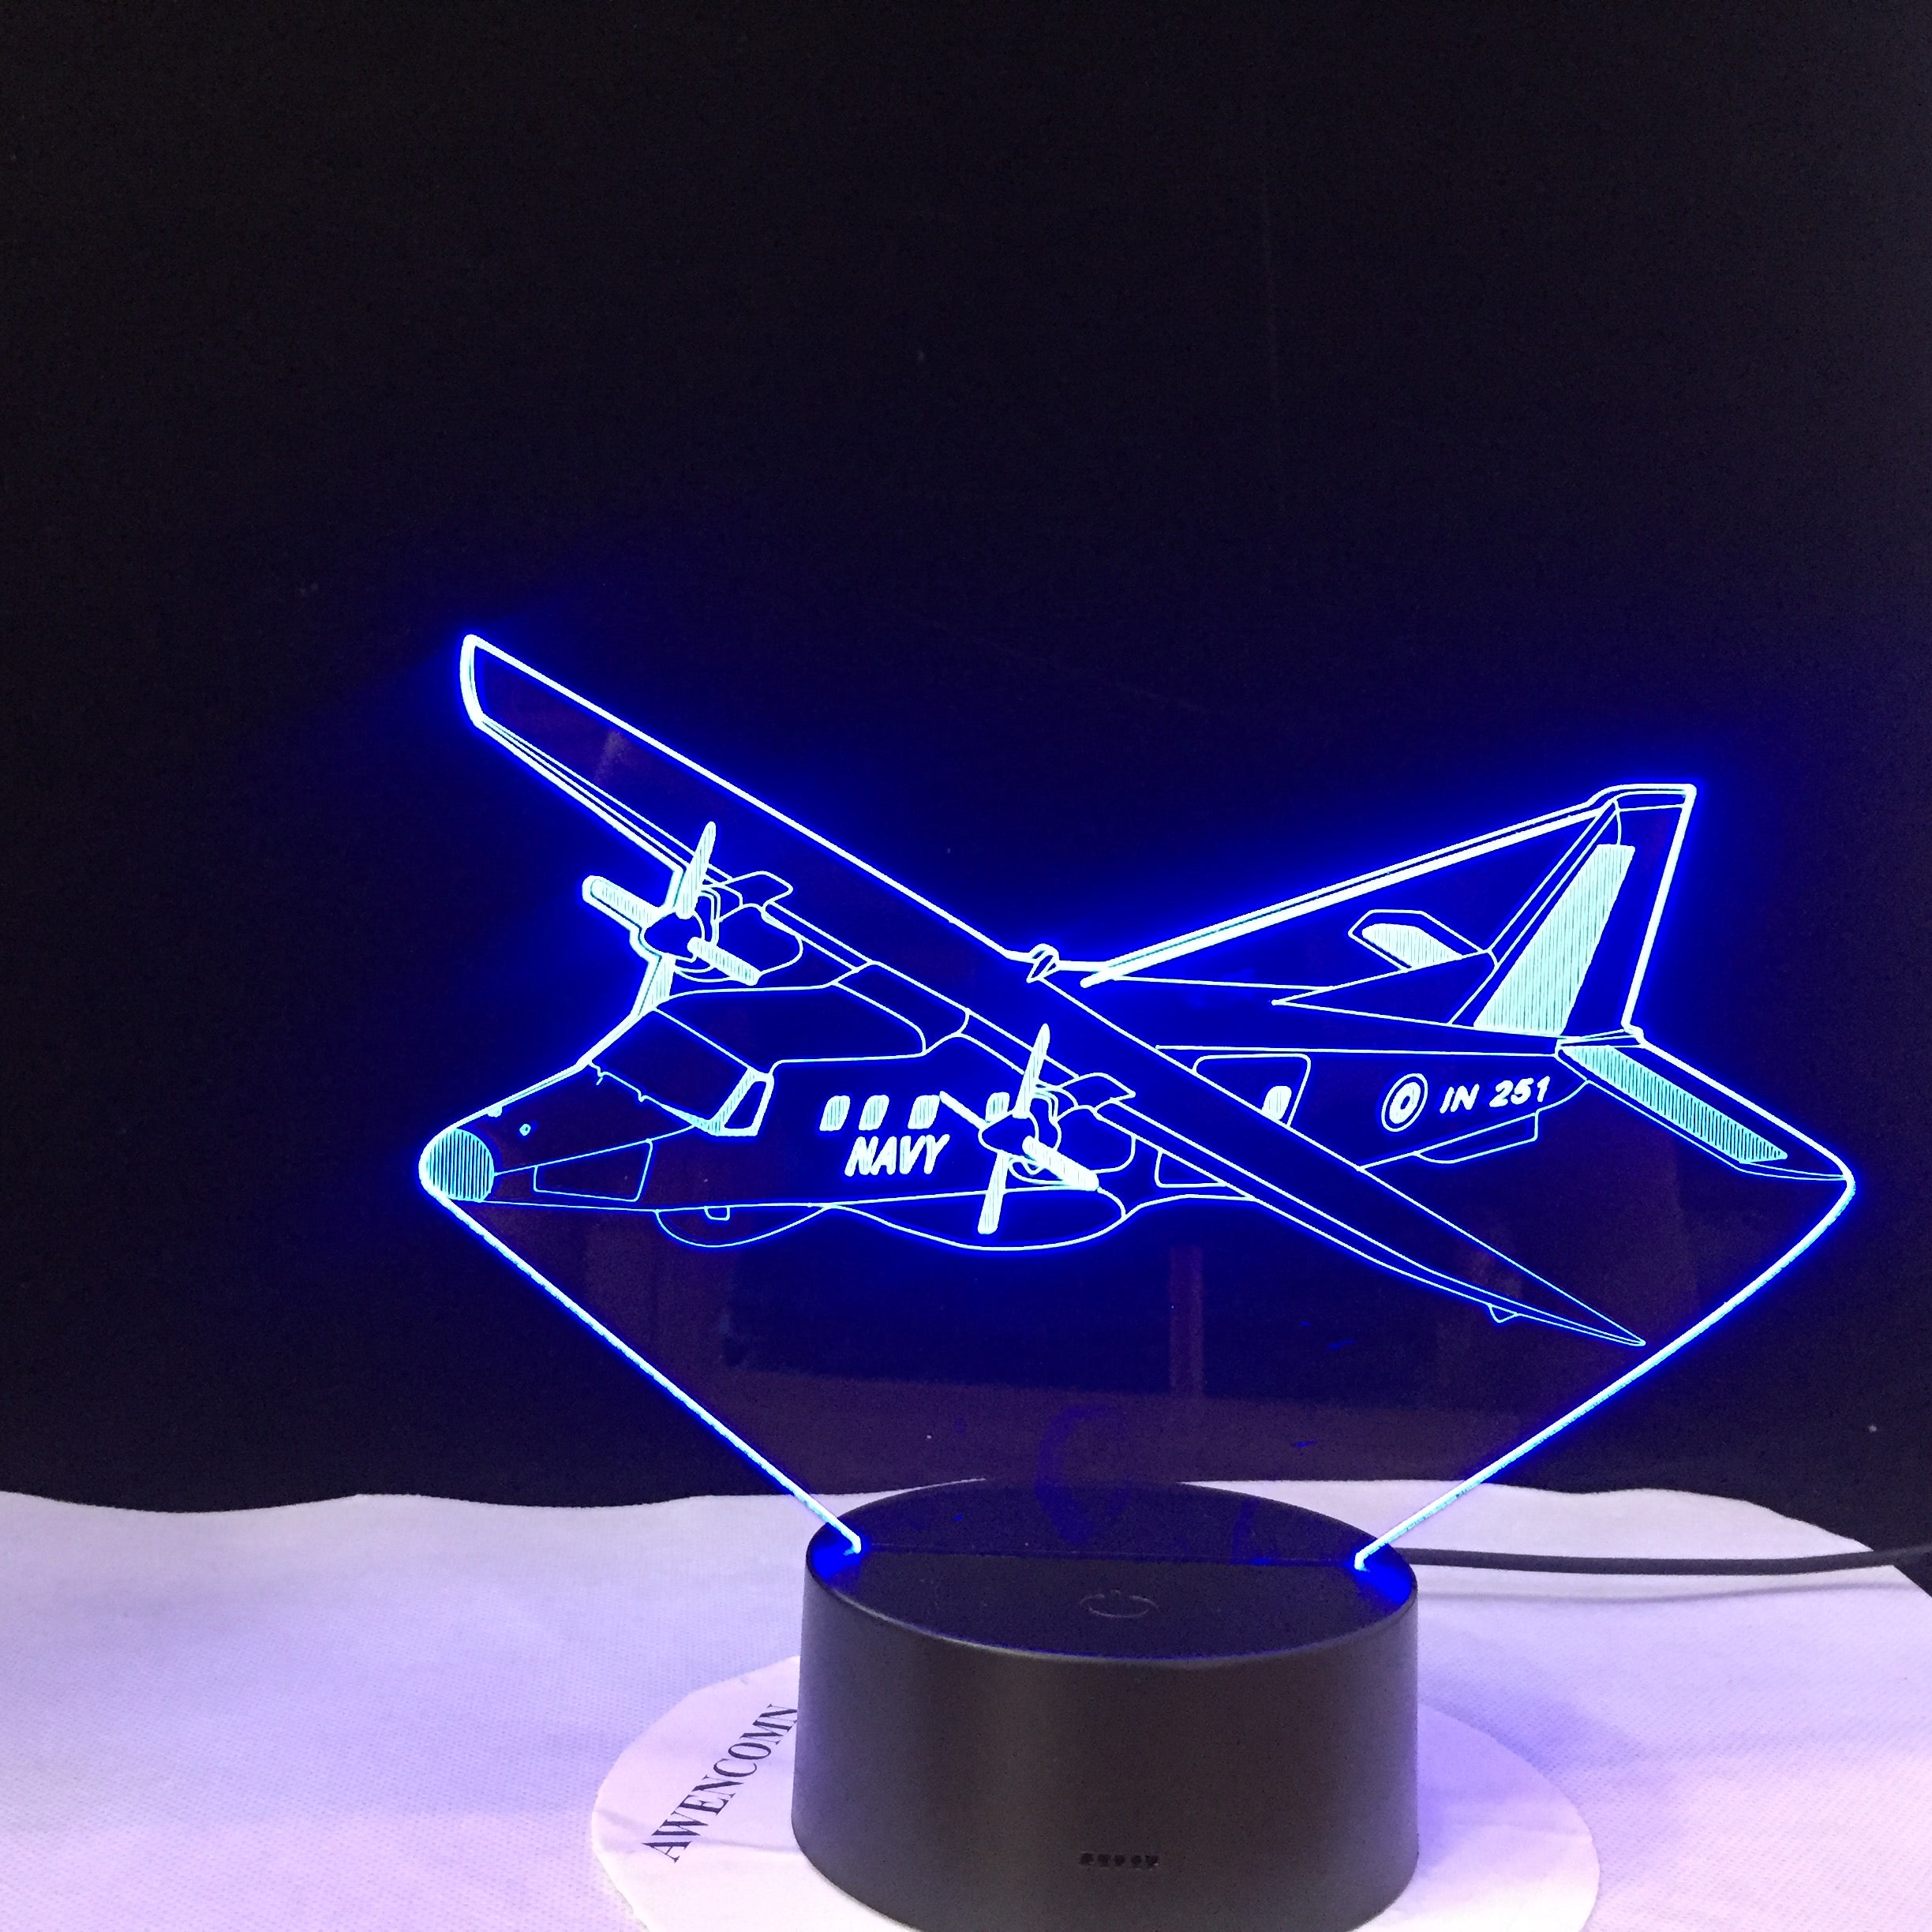 Air Craft Airplane Toy 3D Night Lamp with Touch / Remote Control LED Light Christmas Gifts Kids Hobbies